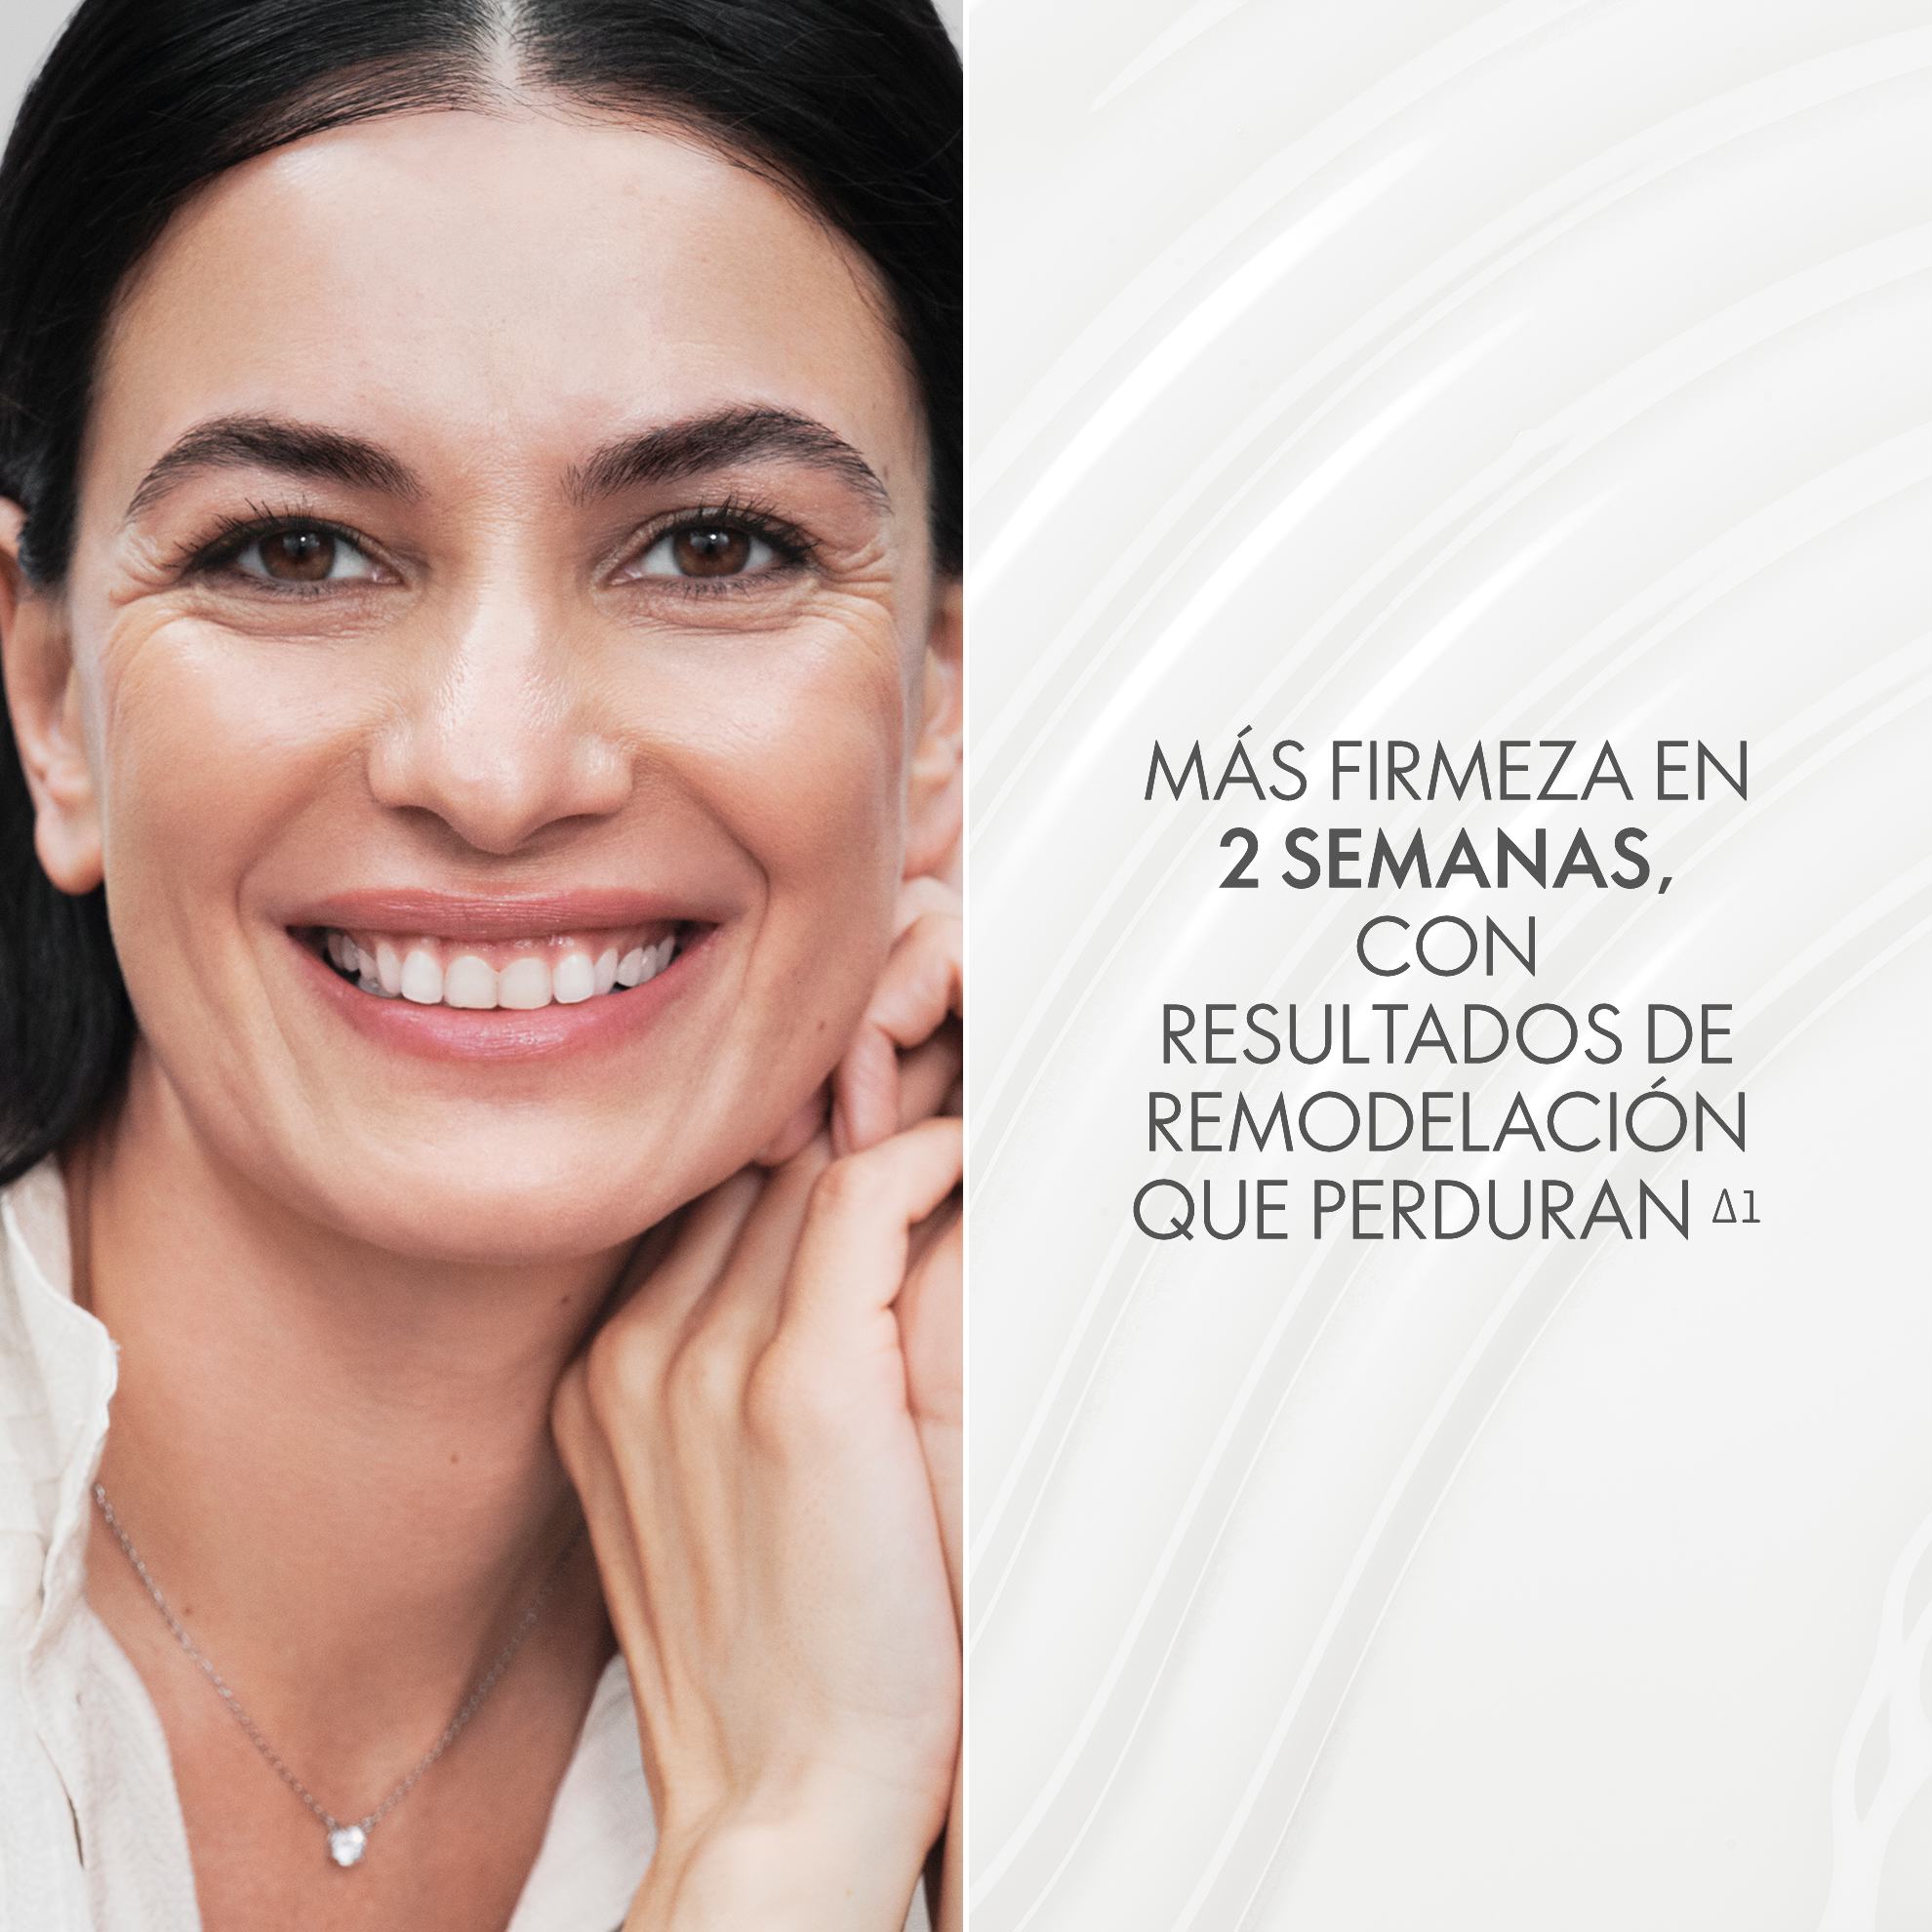 https://media-cdn.oriflame.com/productImage?externalMediaId=product-management-media%2fProducts%2f45592%2fCO%2f45592_2.png&id=18246461&version=1